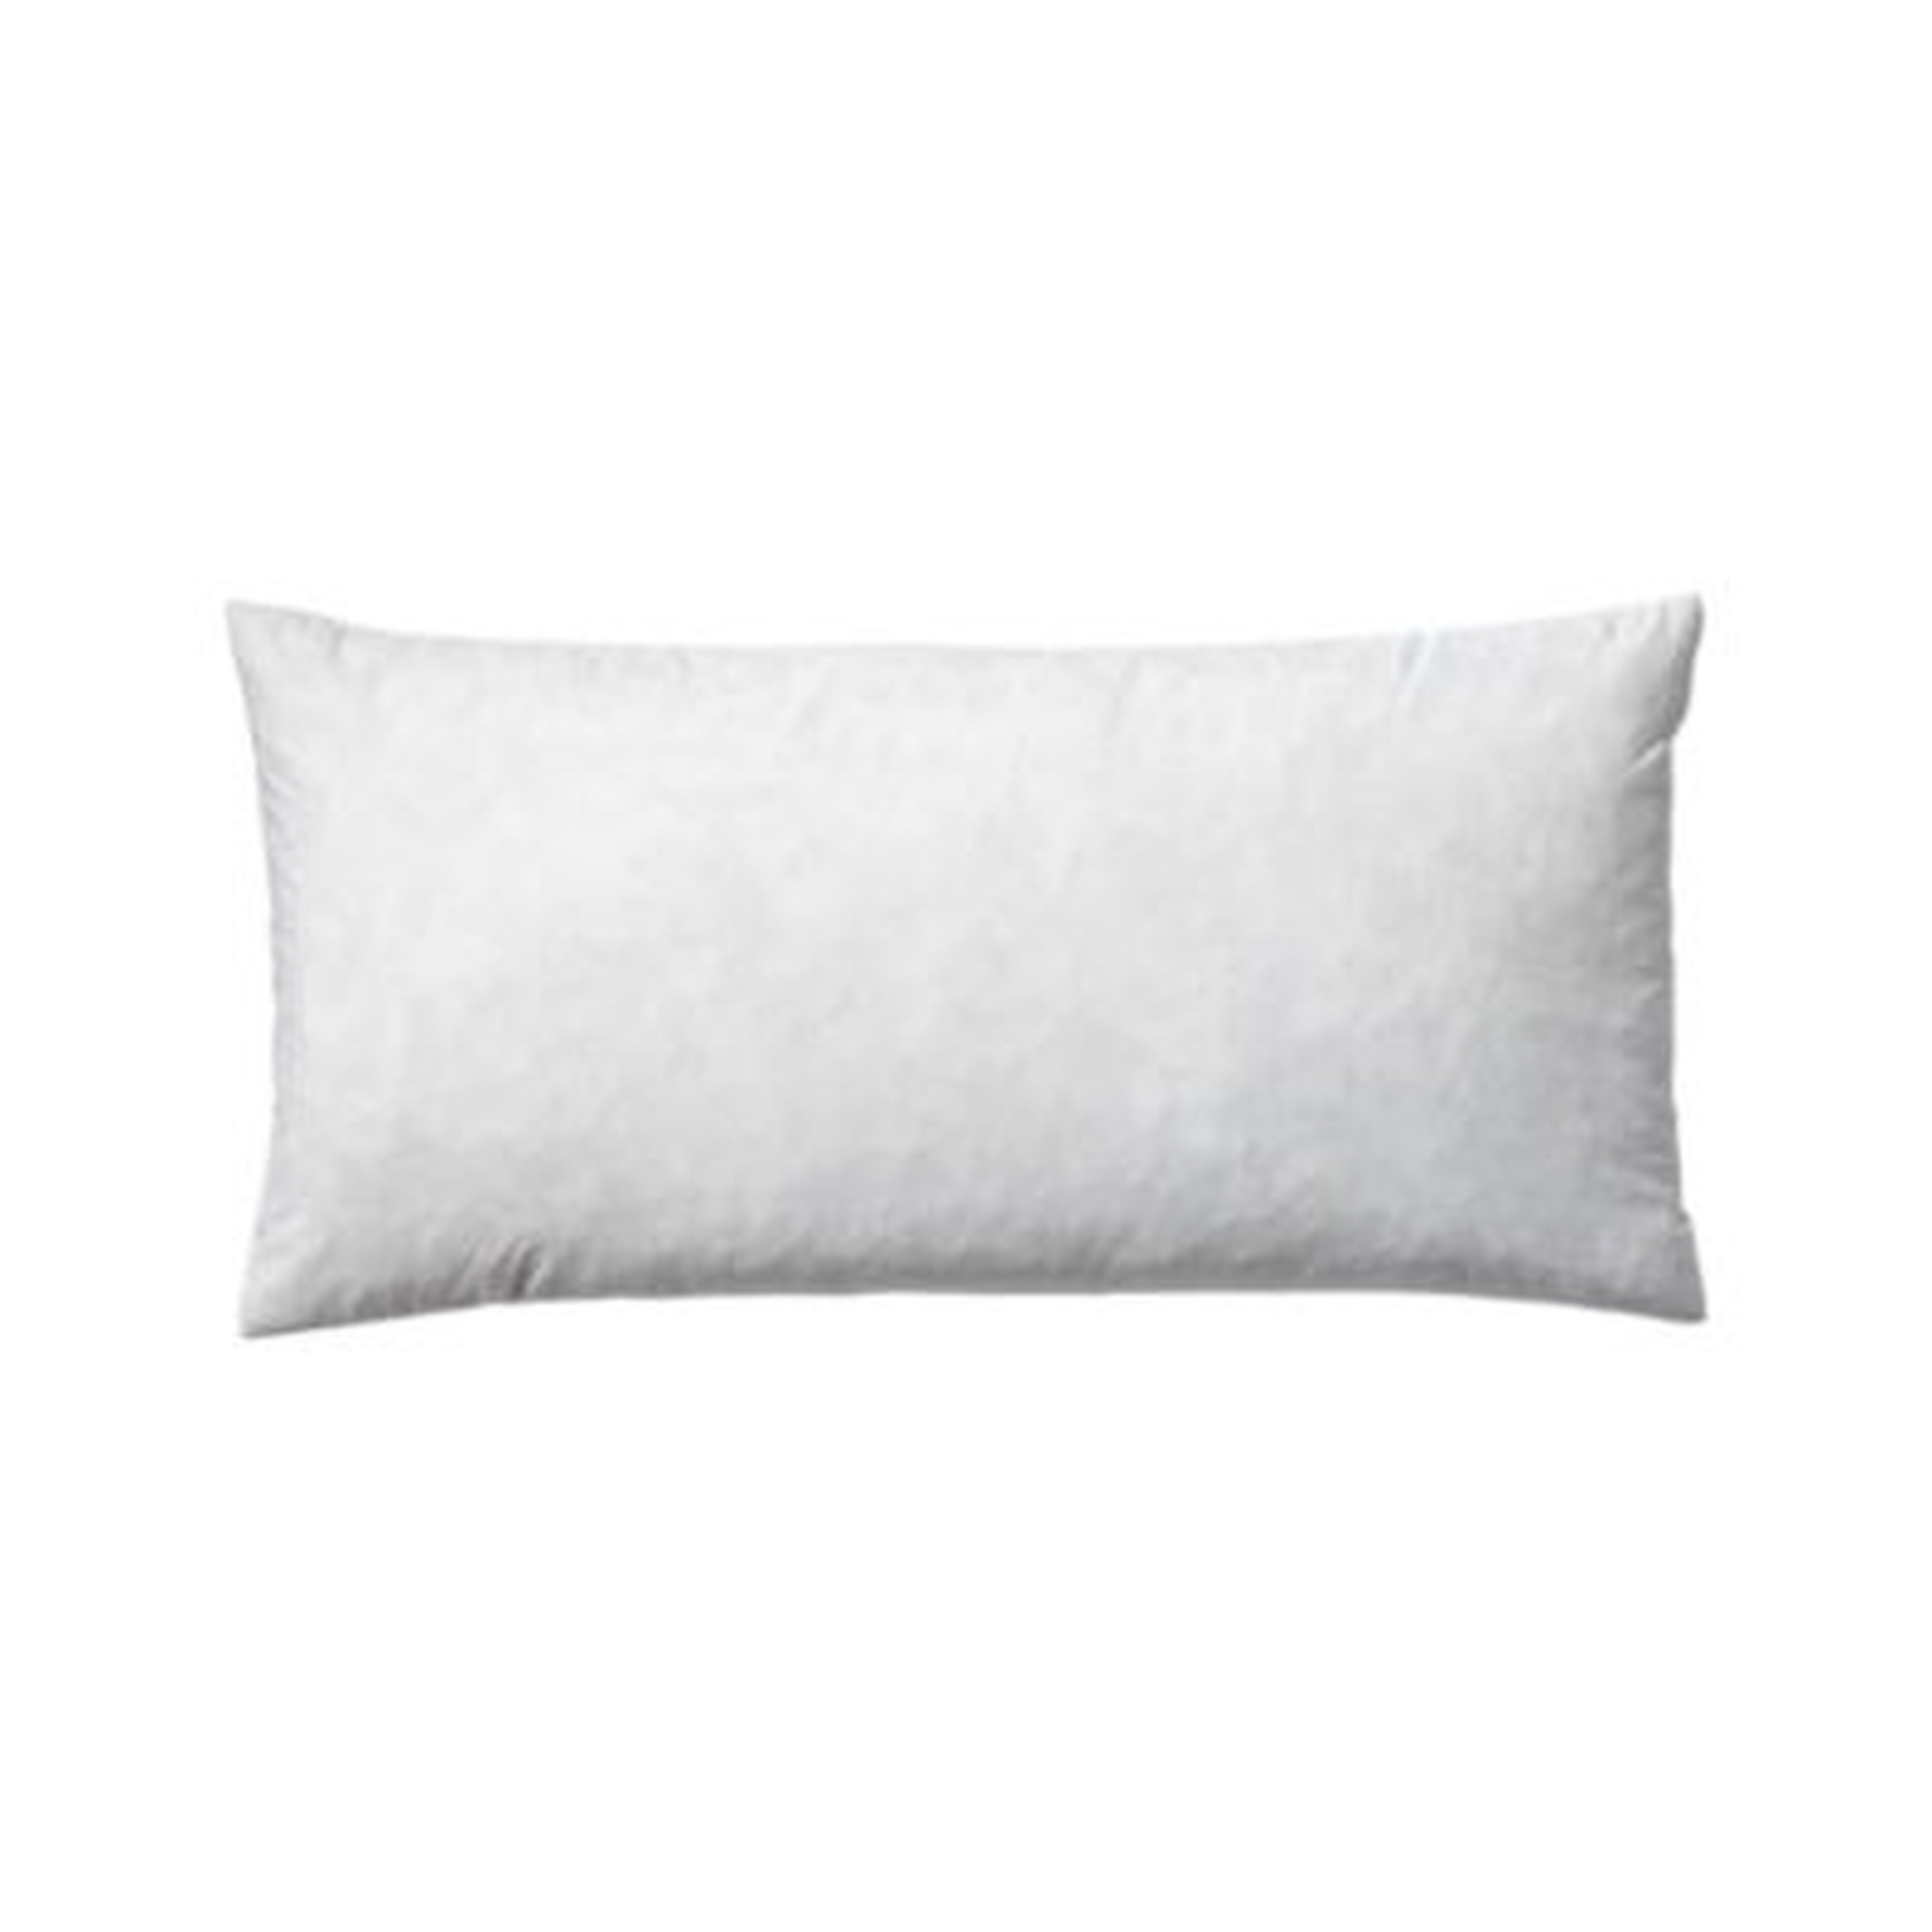 Pillow Insert - 12" x 18" - Serena and Lily